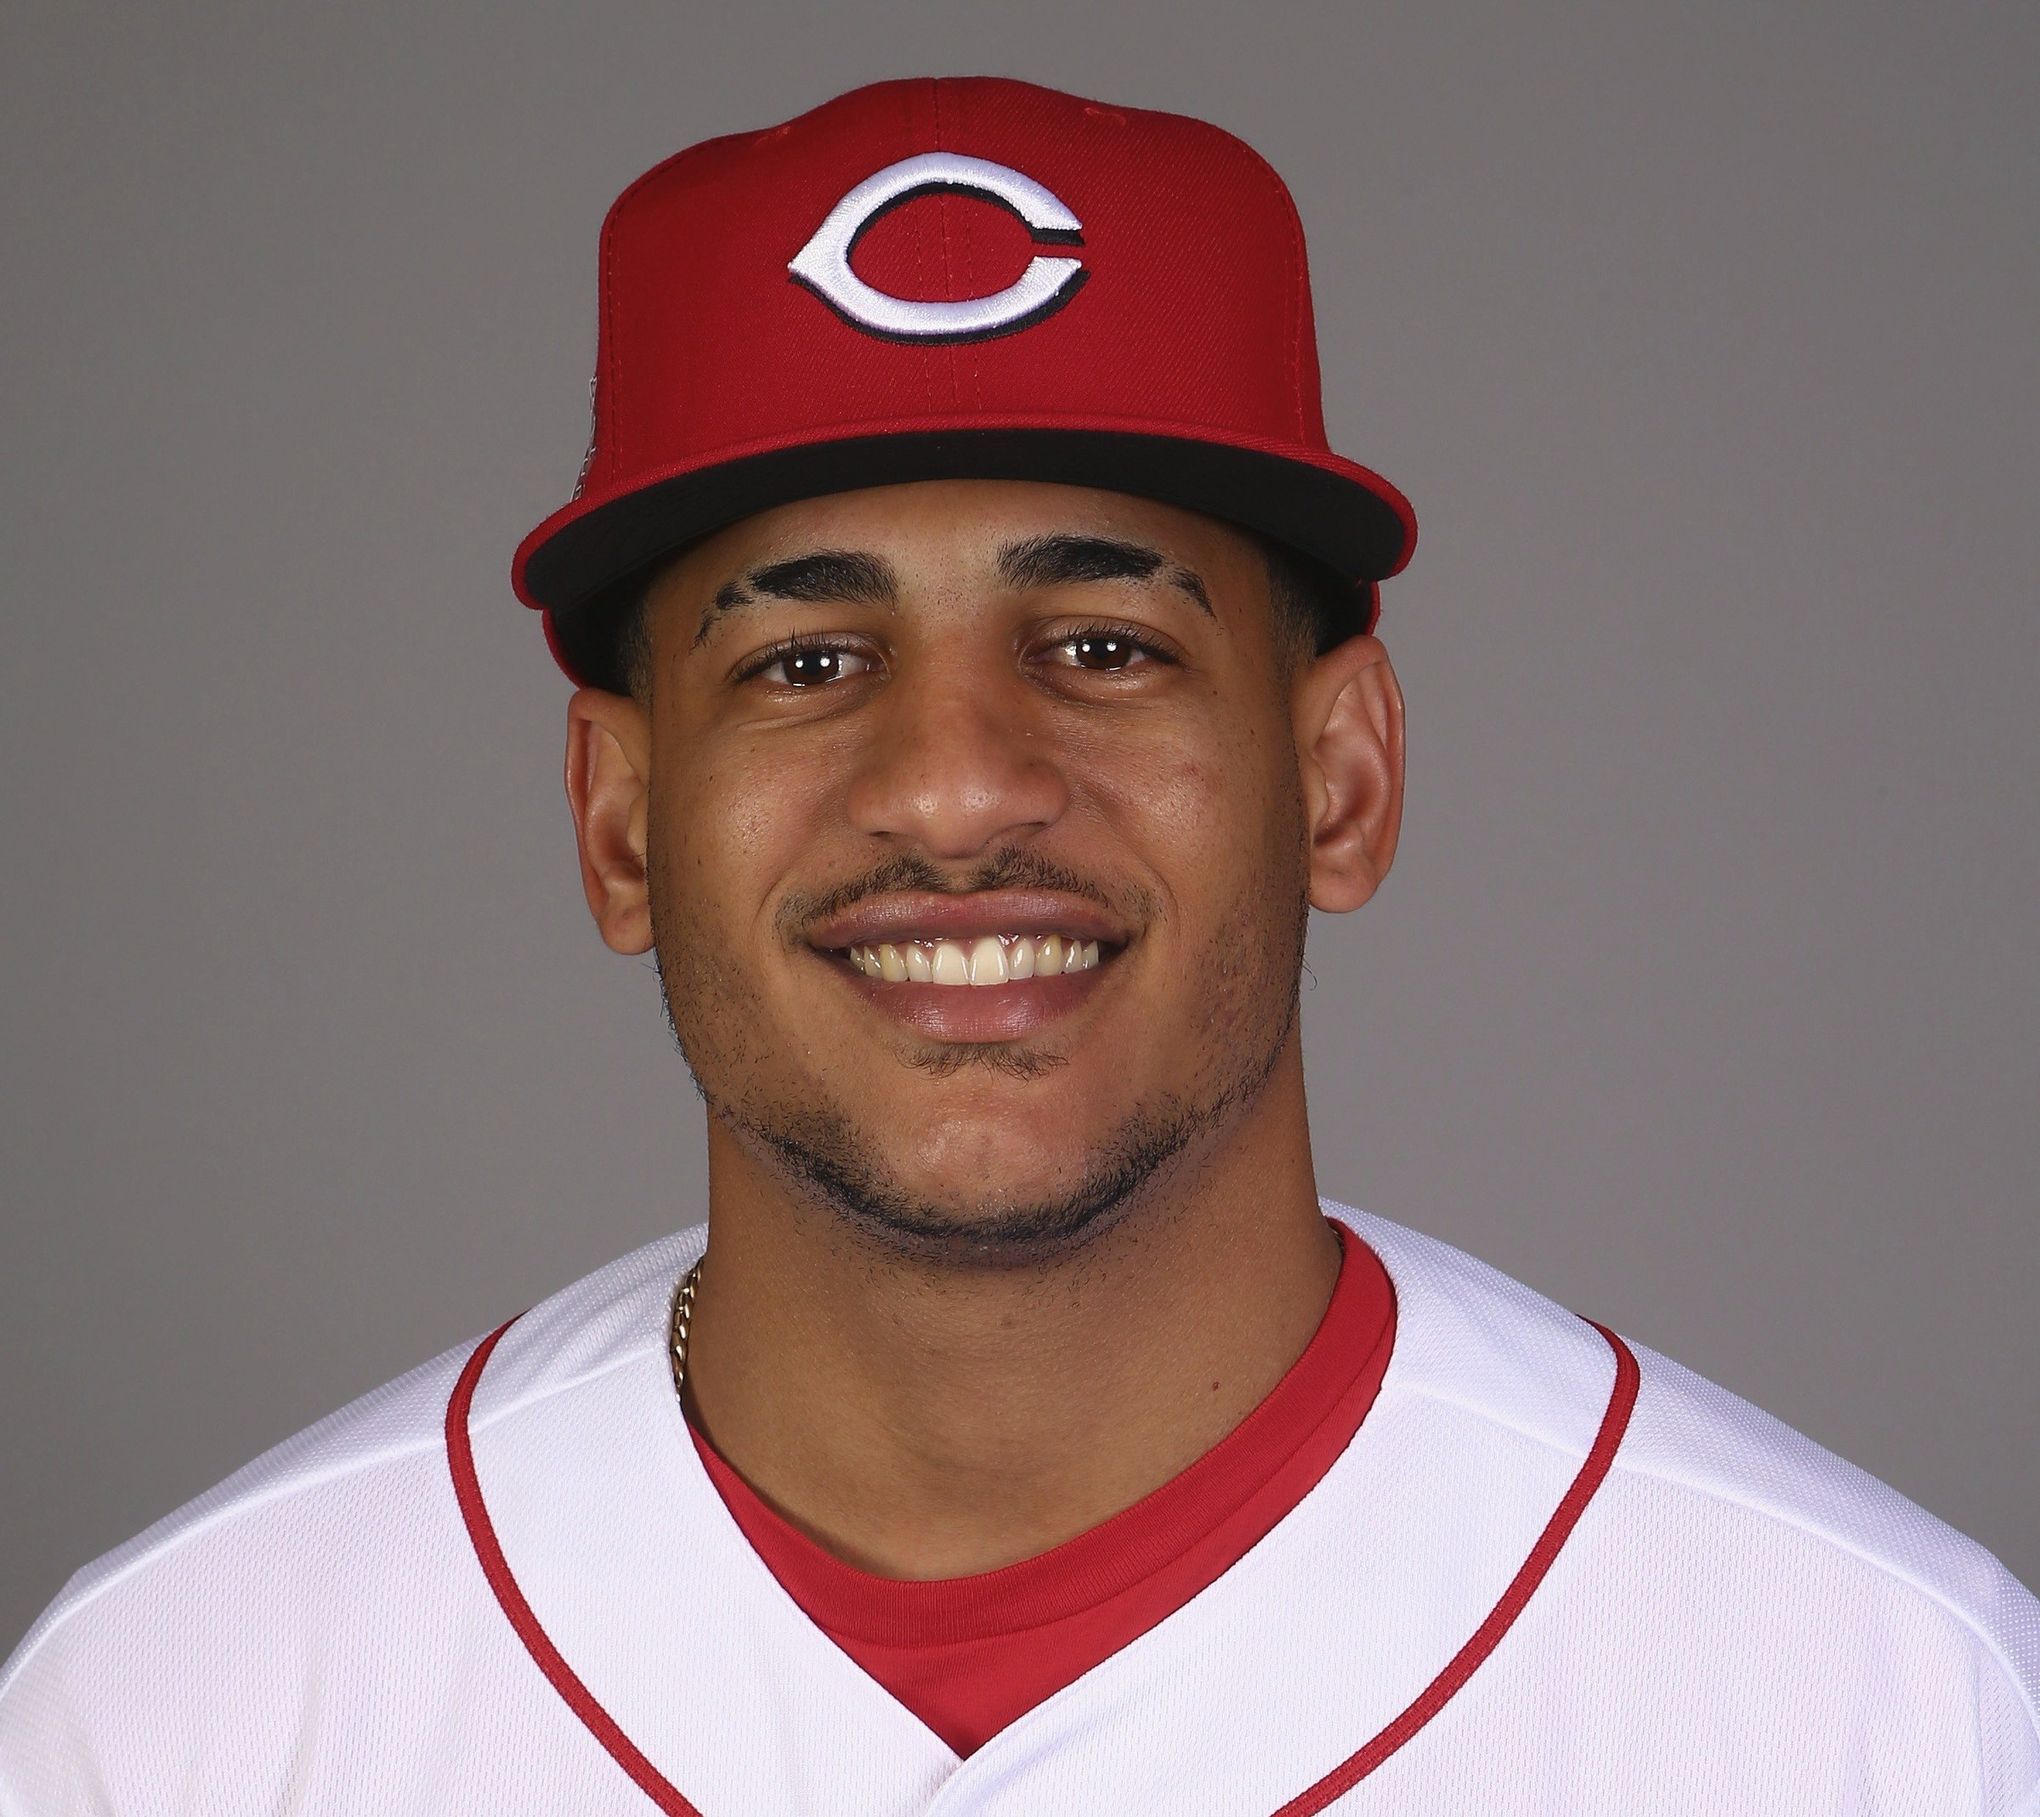 Mariners claim outfielder Jose Siri off waivers from the Reds